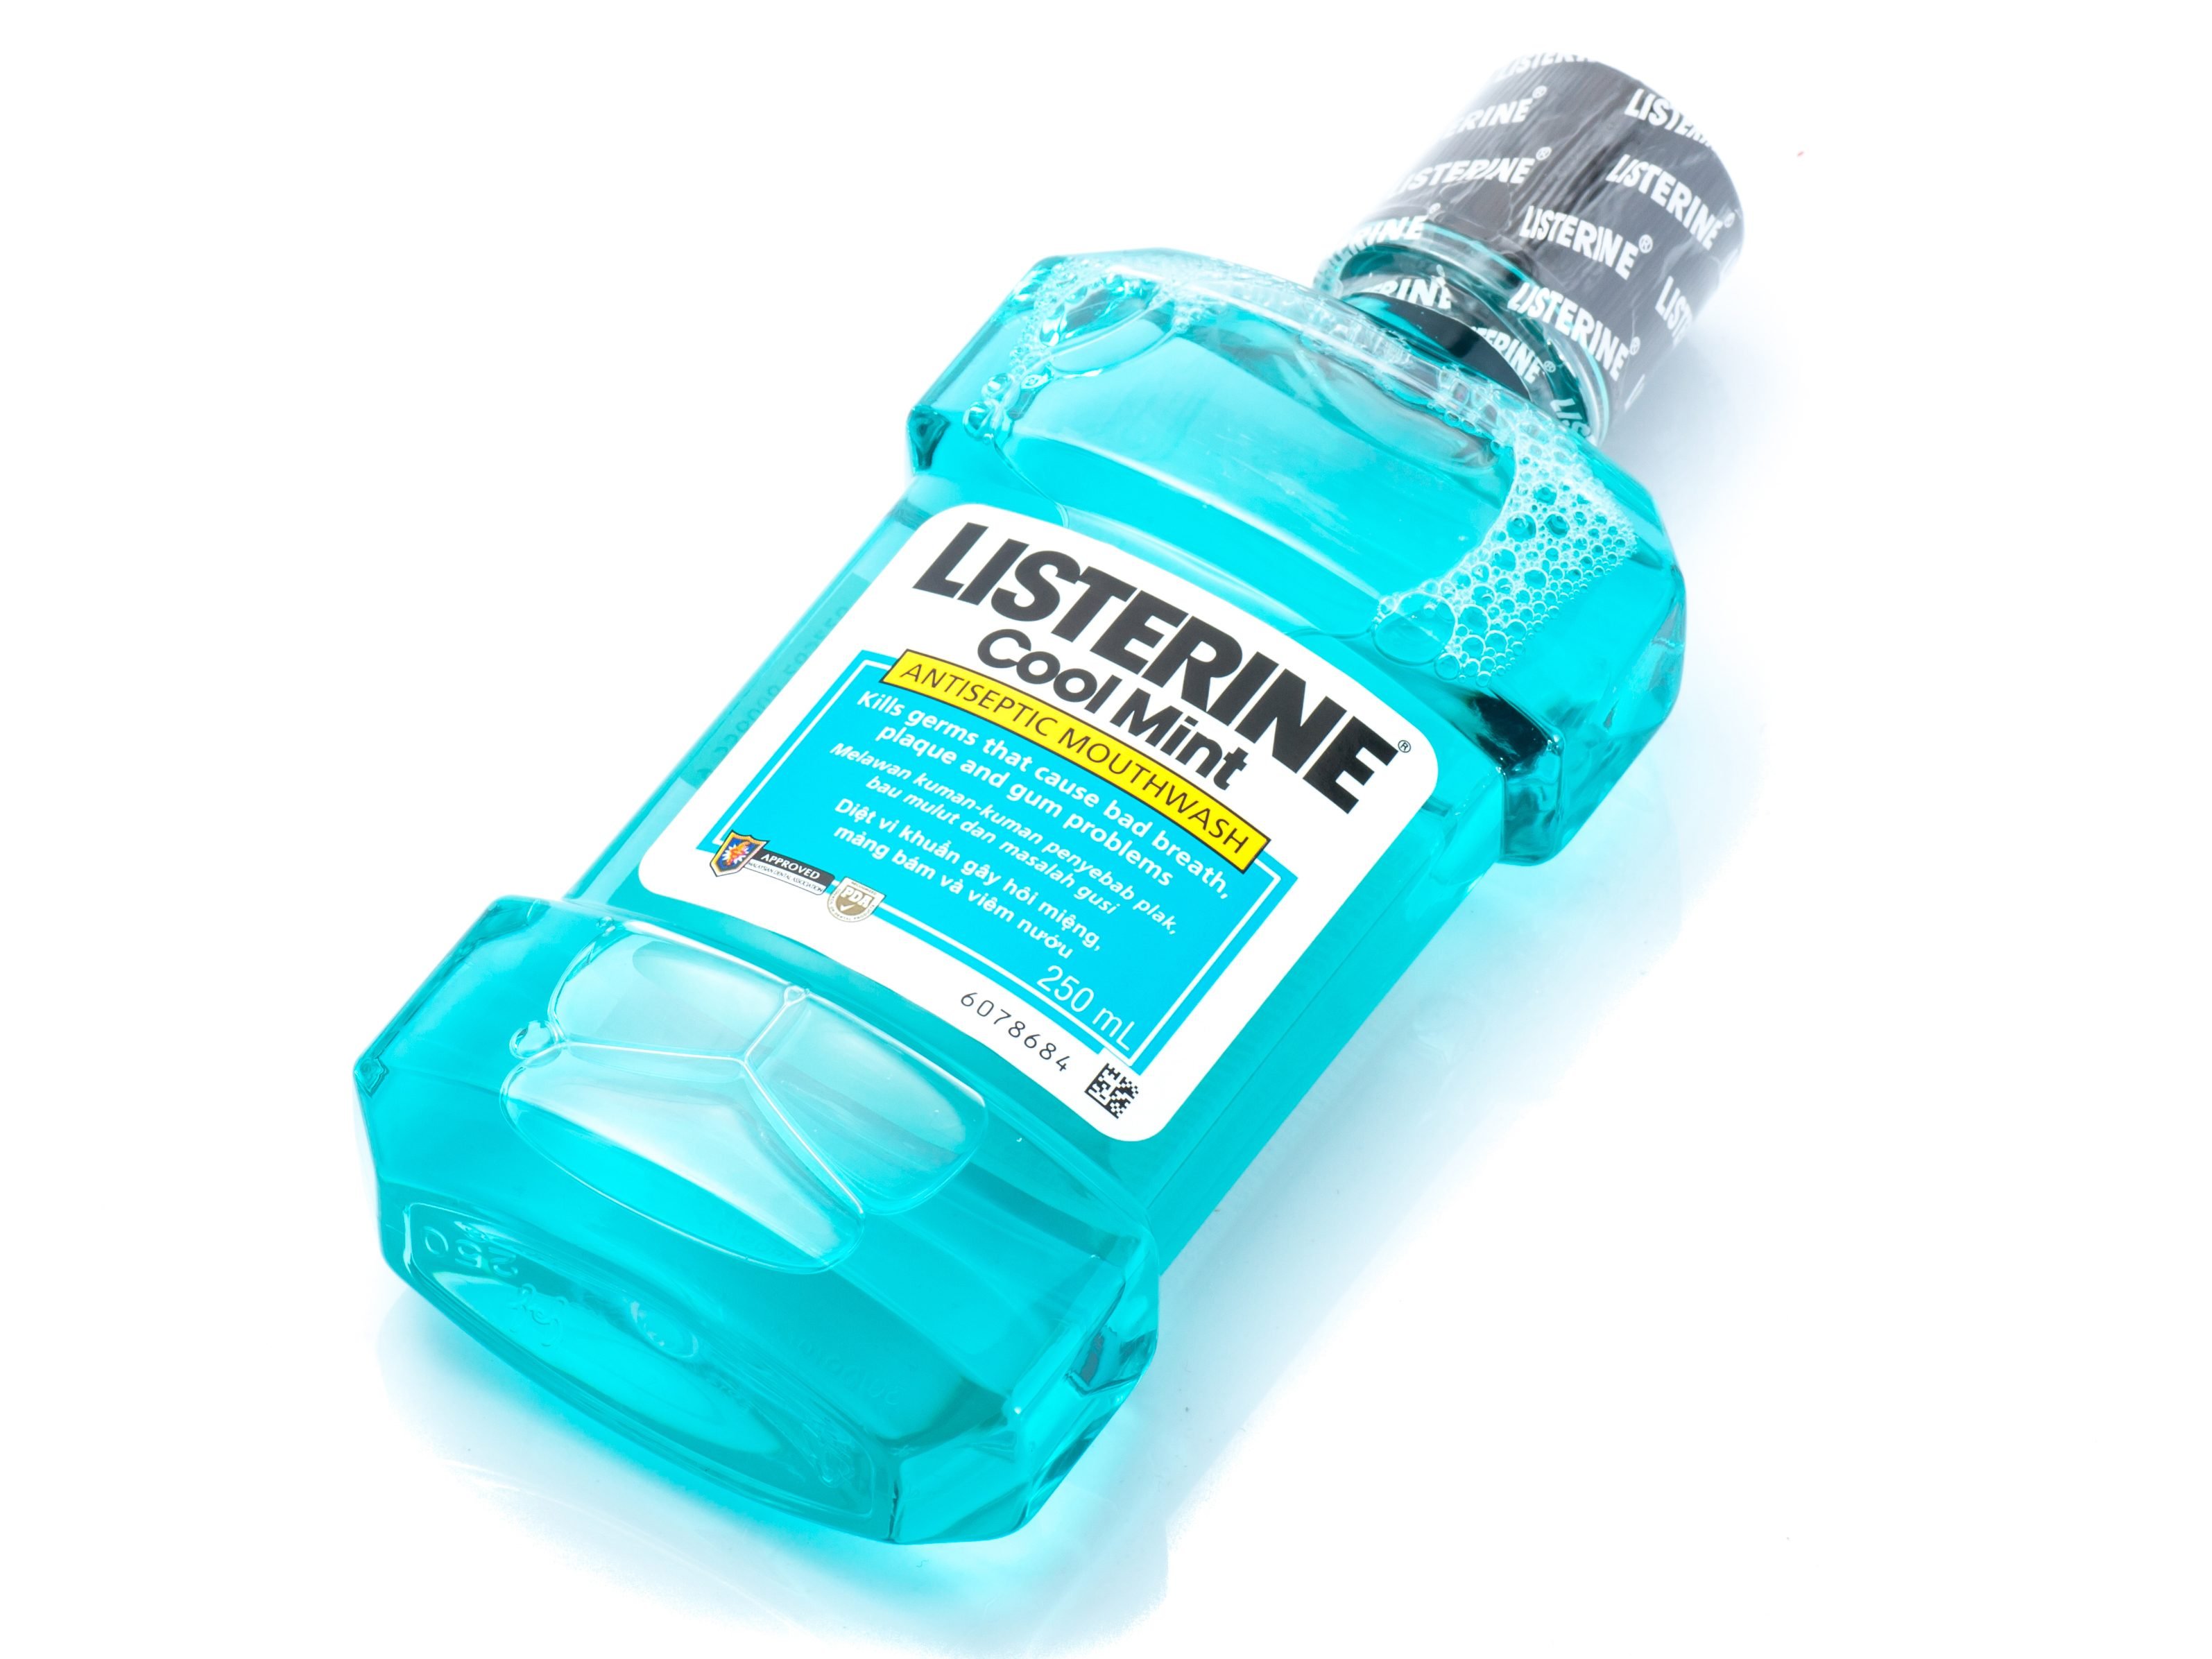 8. Try Listerine in your Washing Machine